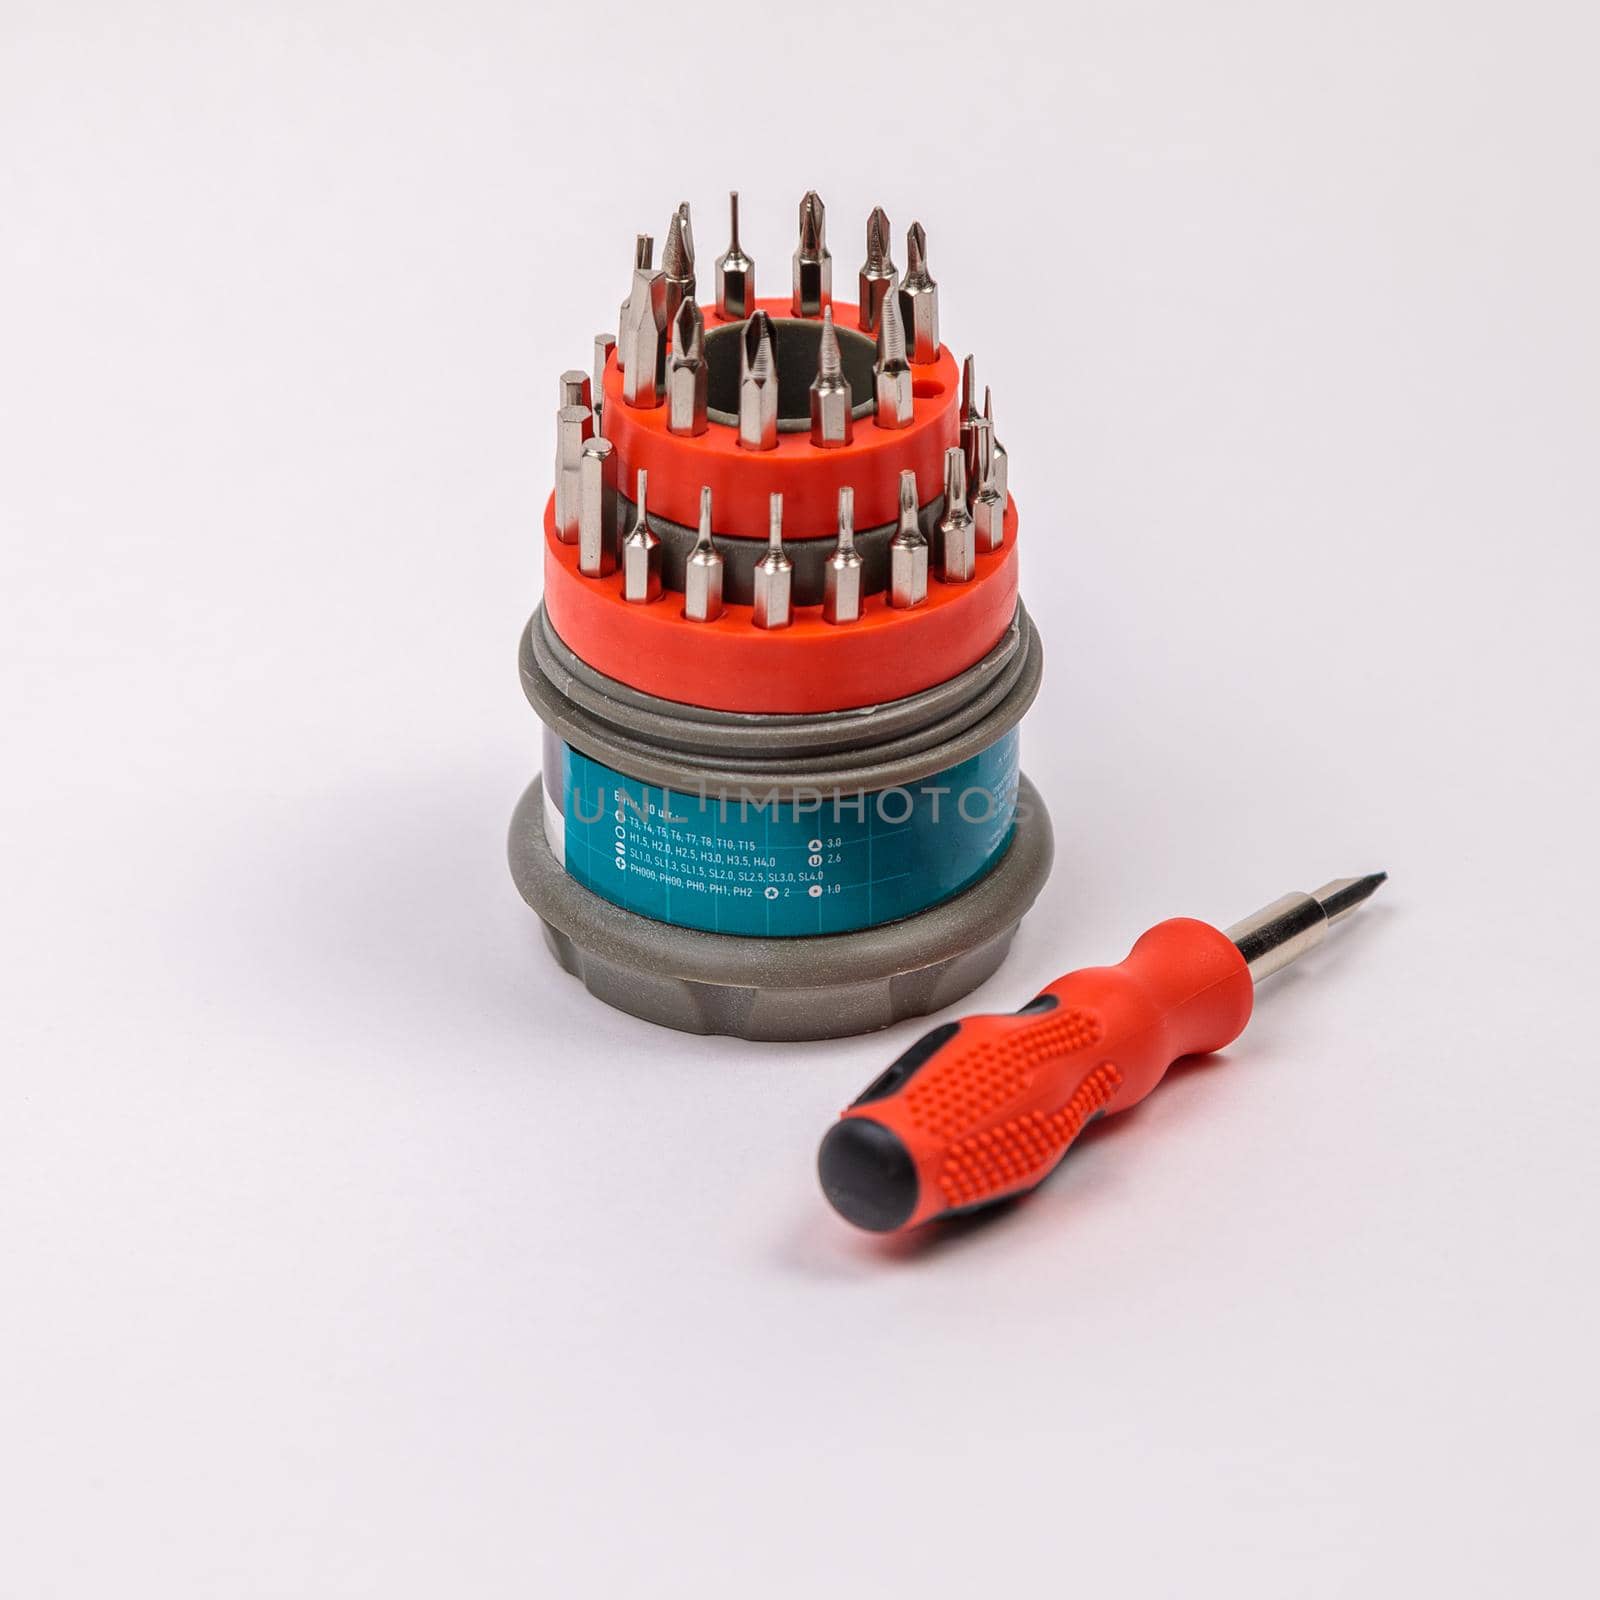 A set of working tools with a screwdriver and bits for repair, in an open plastic box with iron bits, inside a screwdriver.